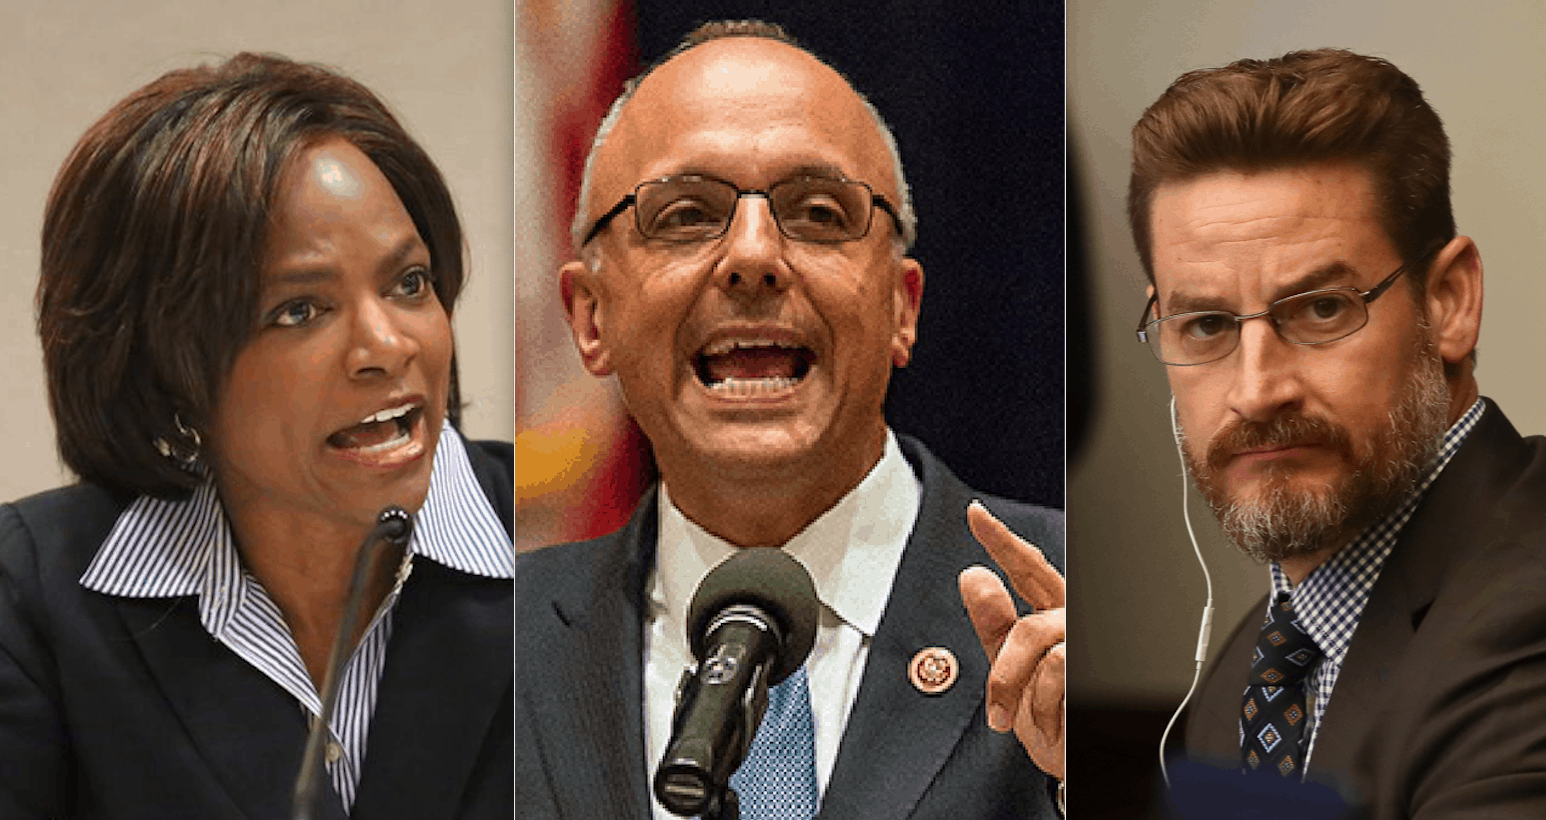 Val-Demings-Ted-Deutch-and-Greg-Steube.png